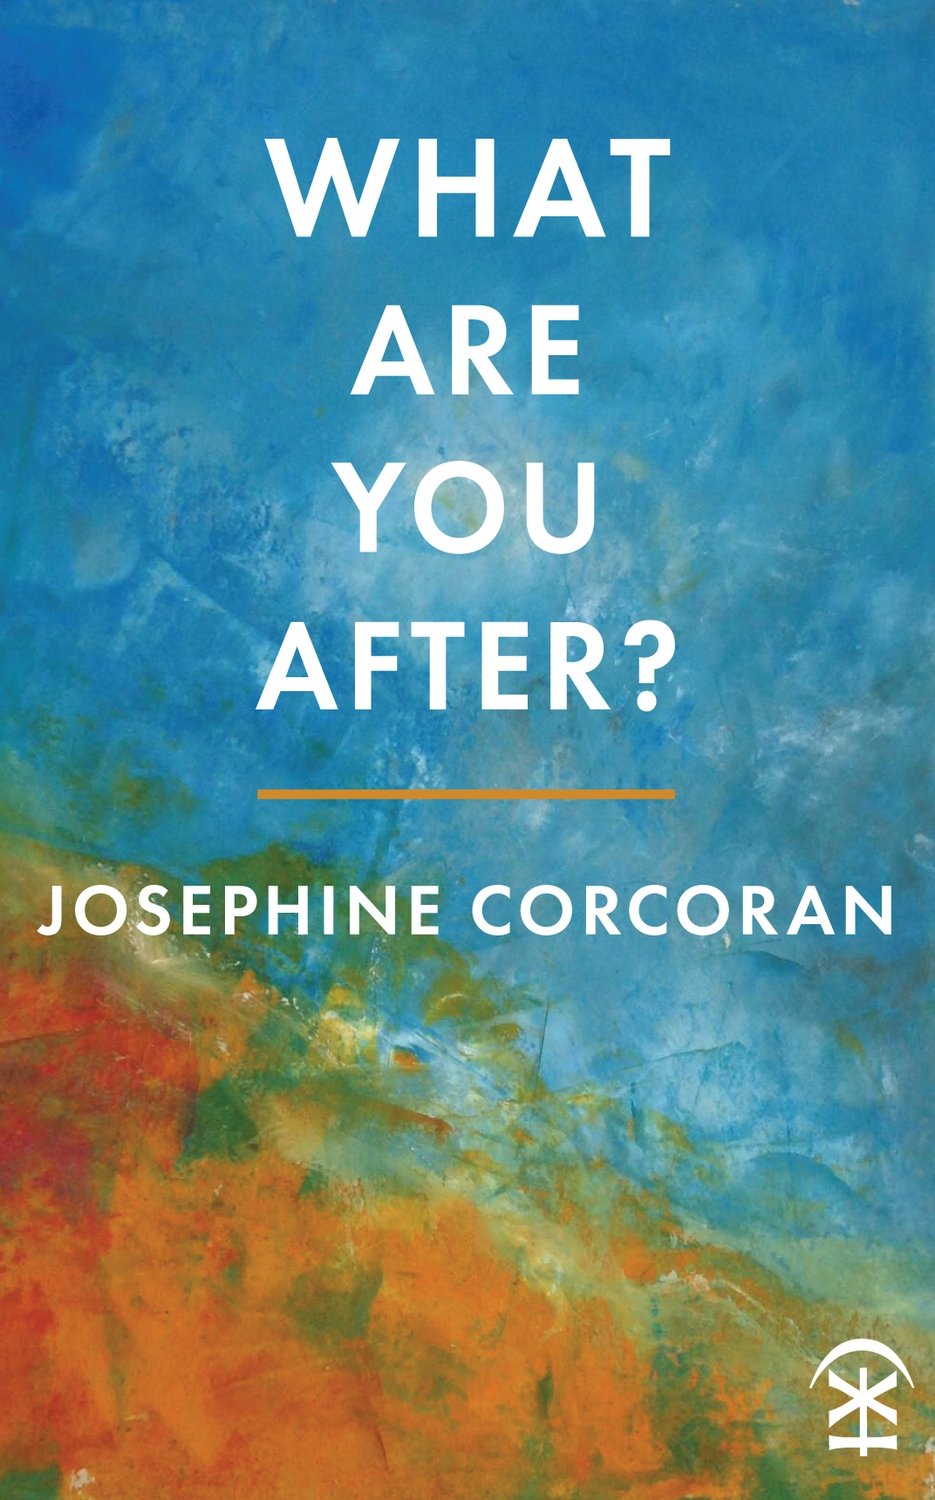 What Are You After - Josephine Corcoran